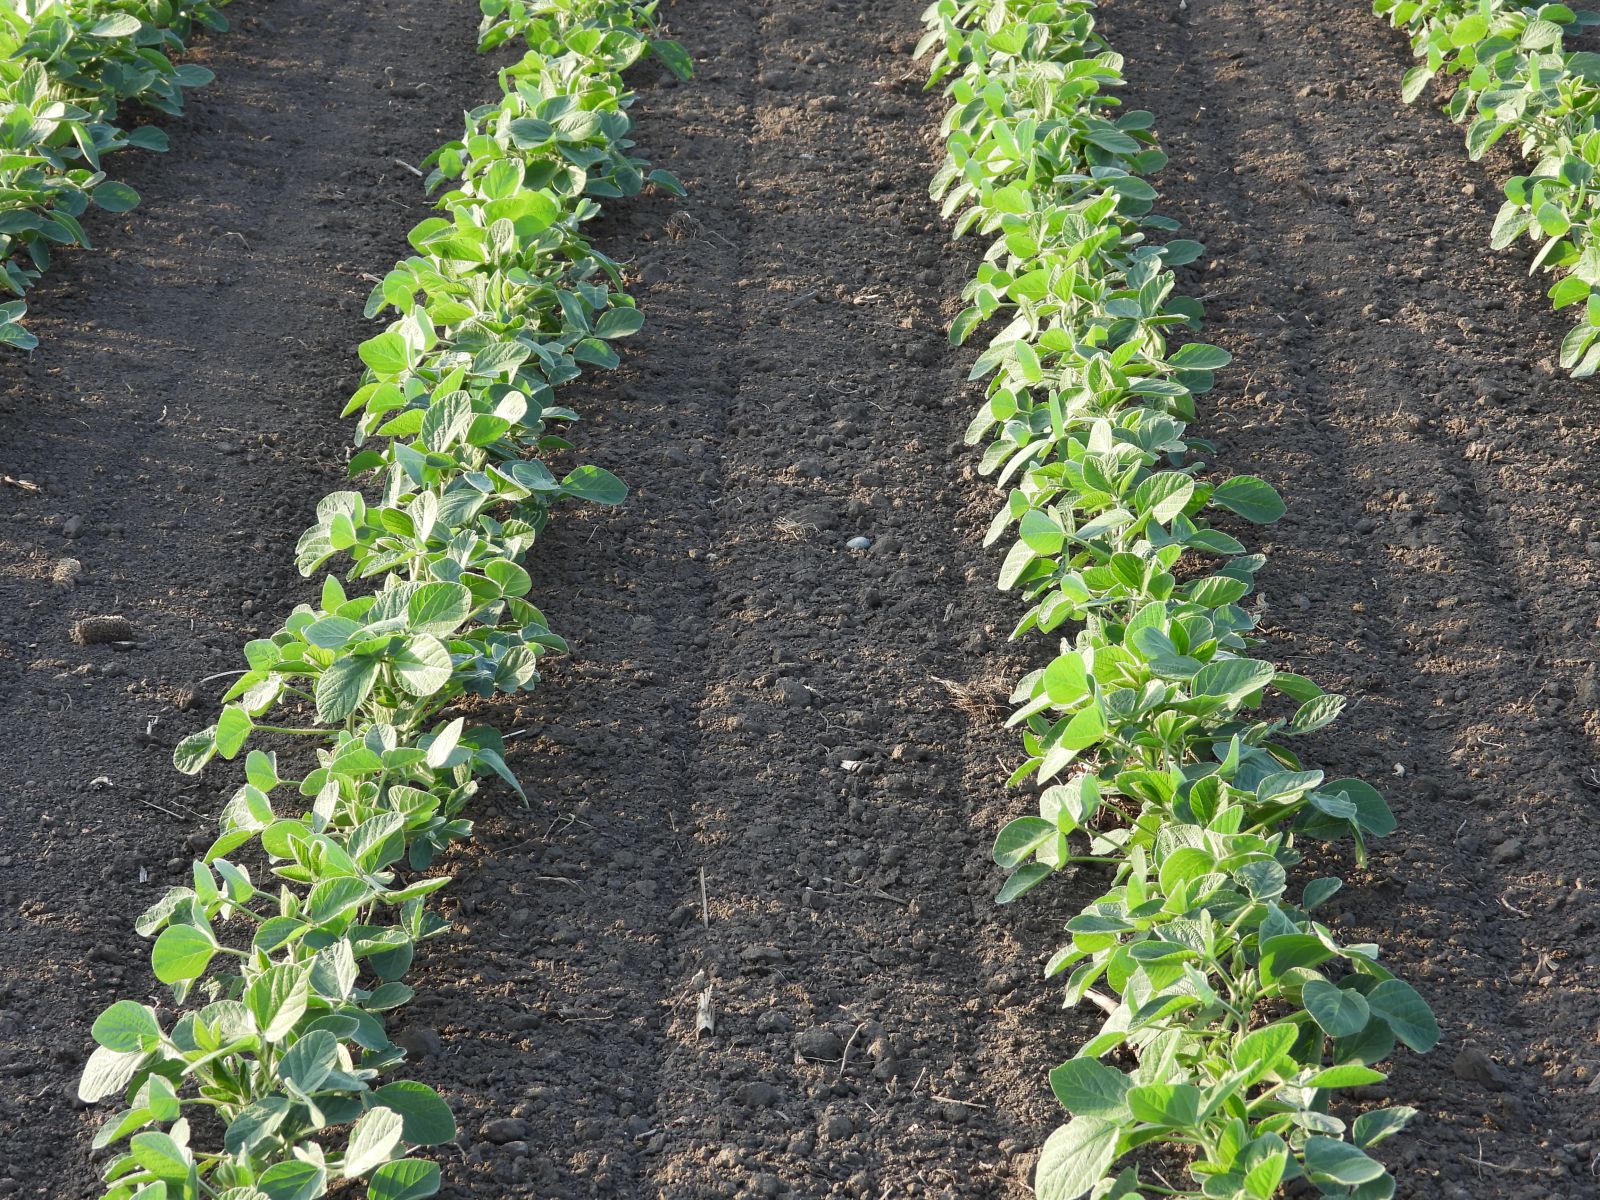 Rows of soybeans in a field by Jana Milin via iStock